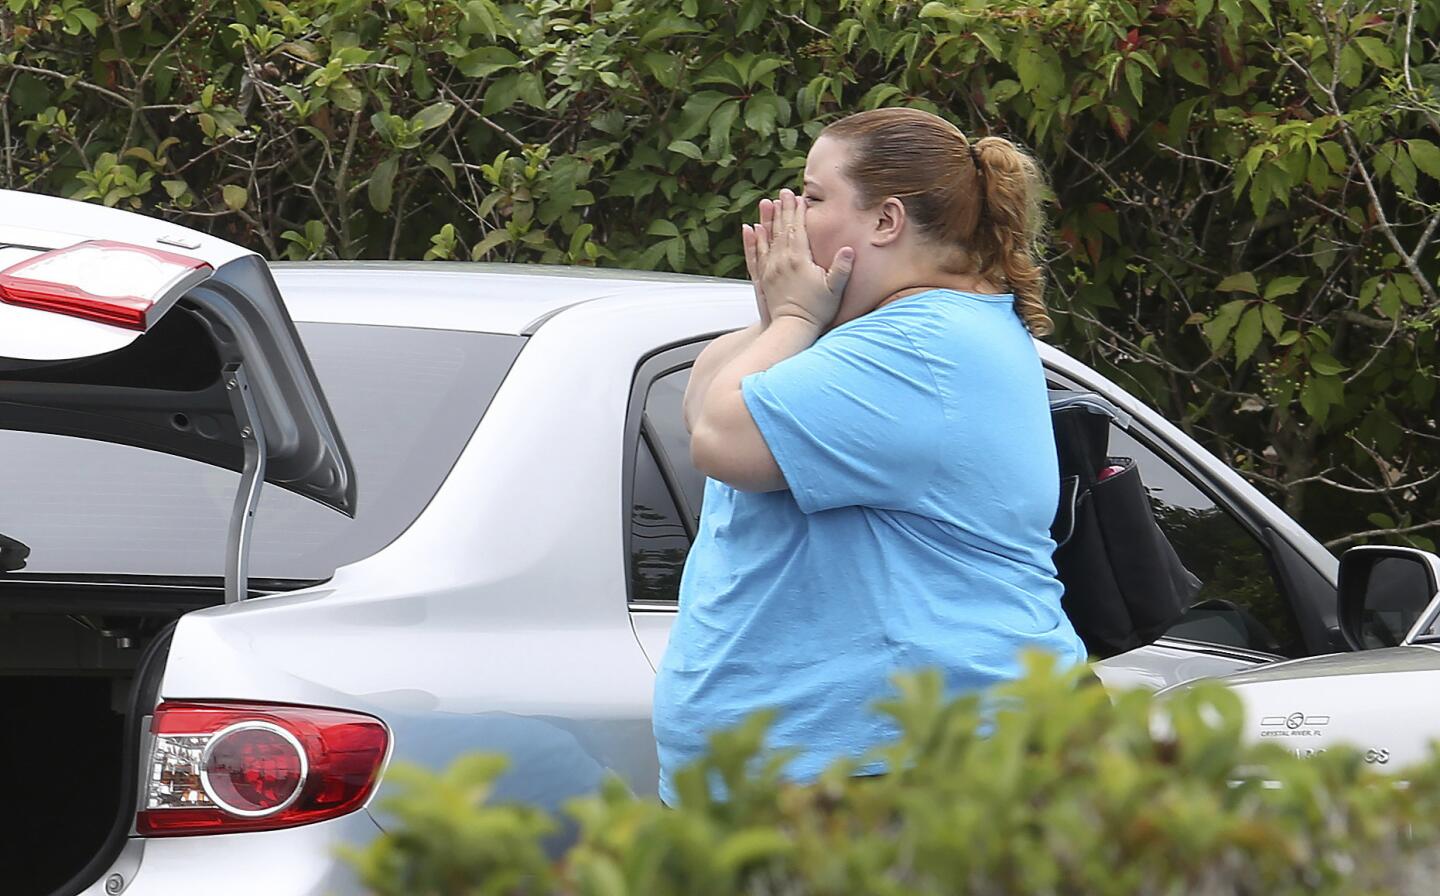 A woman reacts after a deadly shooting Monday, June 5, 2017, in Orlando, Fla. A man who was fired from a Florida awning factory in April returned Monday with a gun and methodically killed several people, then took his own life, authorities said.